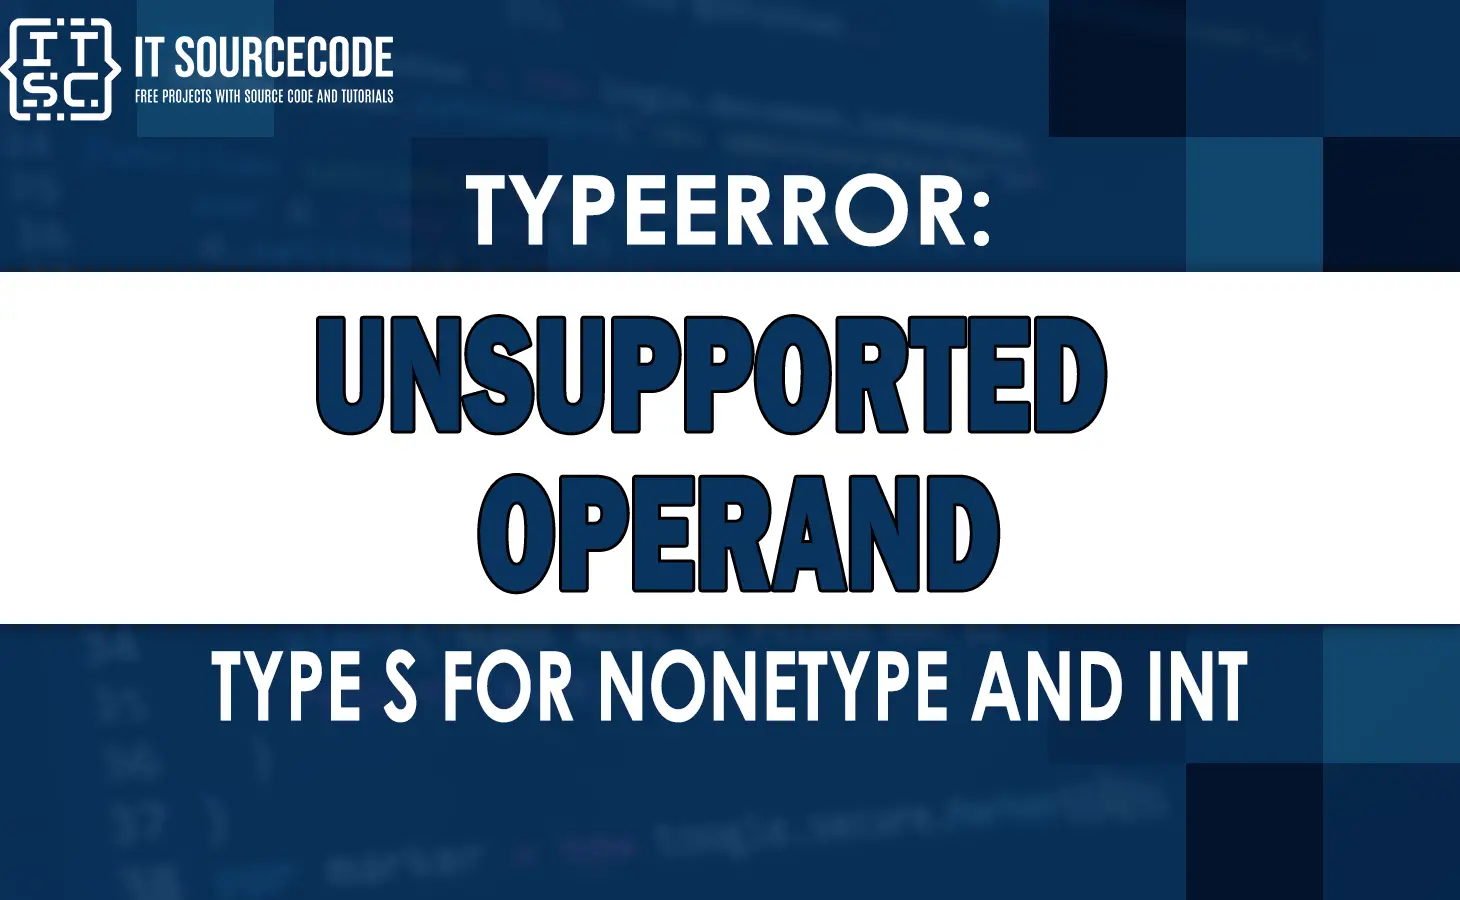 TYPEERROR unsupported operand Type s for INT and Str перевод. TYPEERROR: unsupported operand Type(s) for /: 'Str' and 'Float'. TYPEERROR: unsupported operand Type(s) for ** or Pow(): 'tuple' and 'INT'.